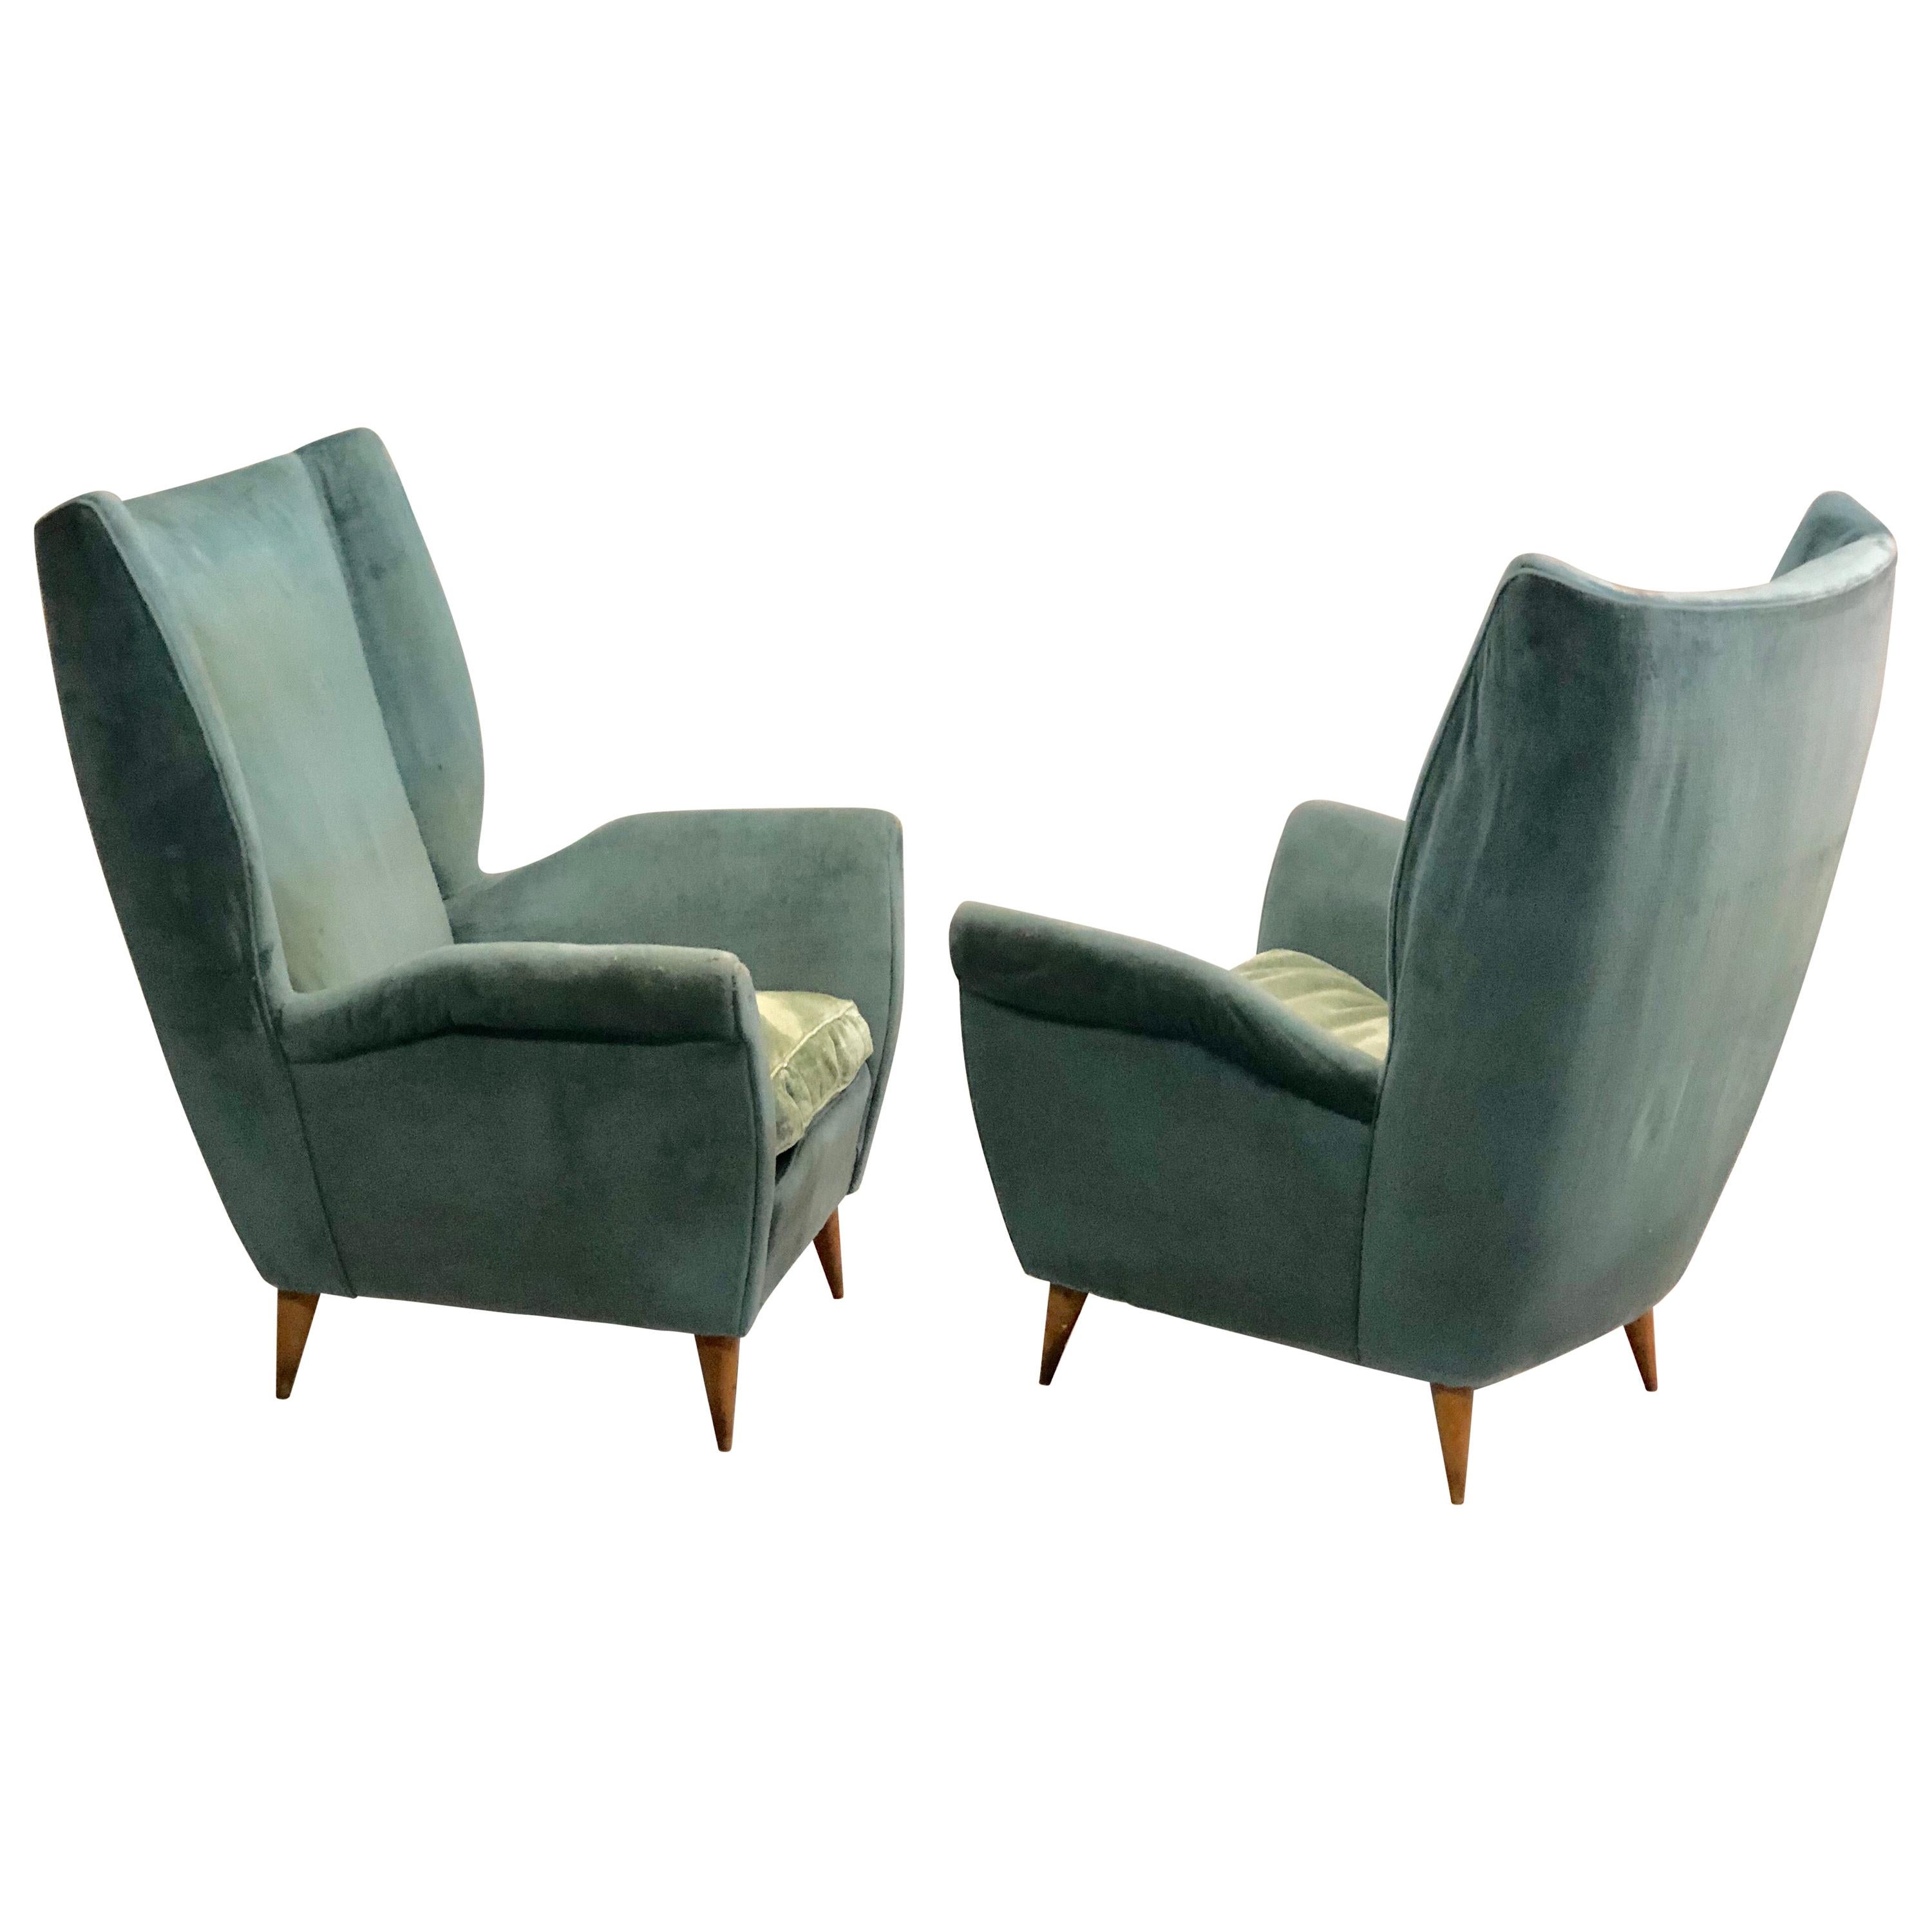 Pair of Italian Midcentury Hi Back Lounge Chairs / Armchairs by Gio Ponti, 1955